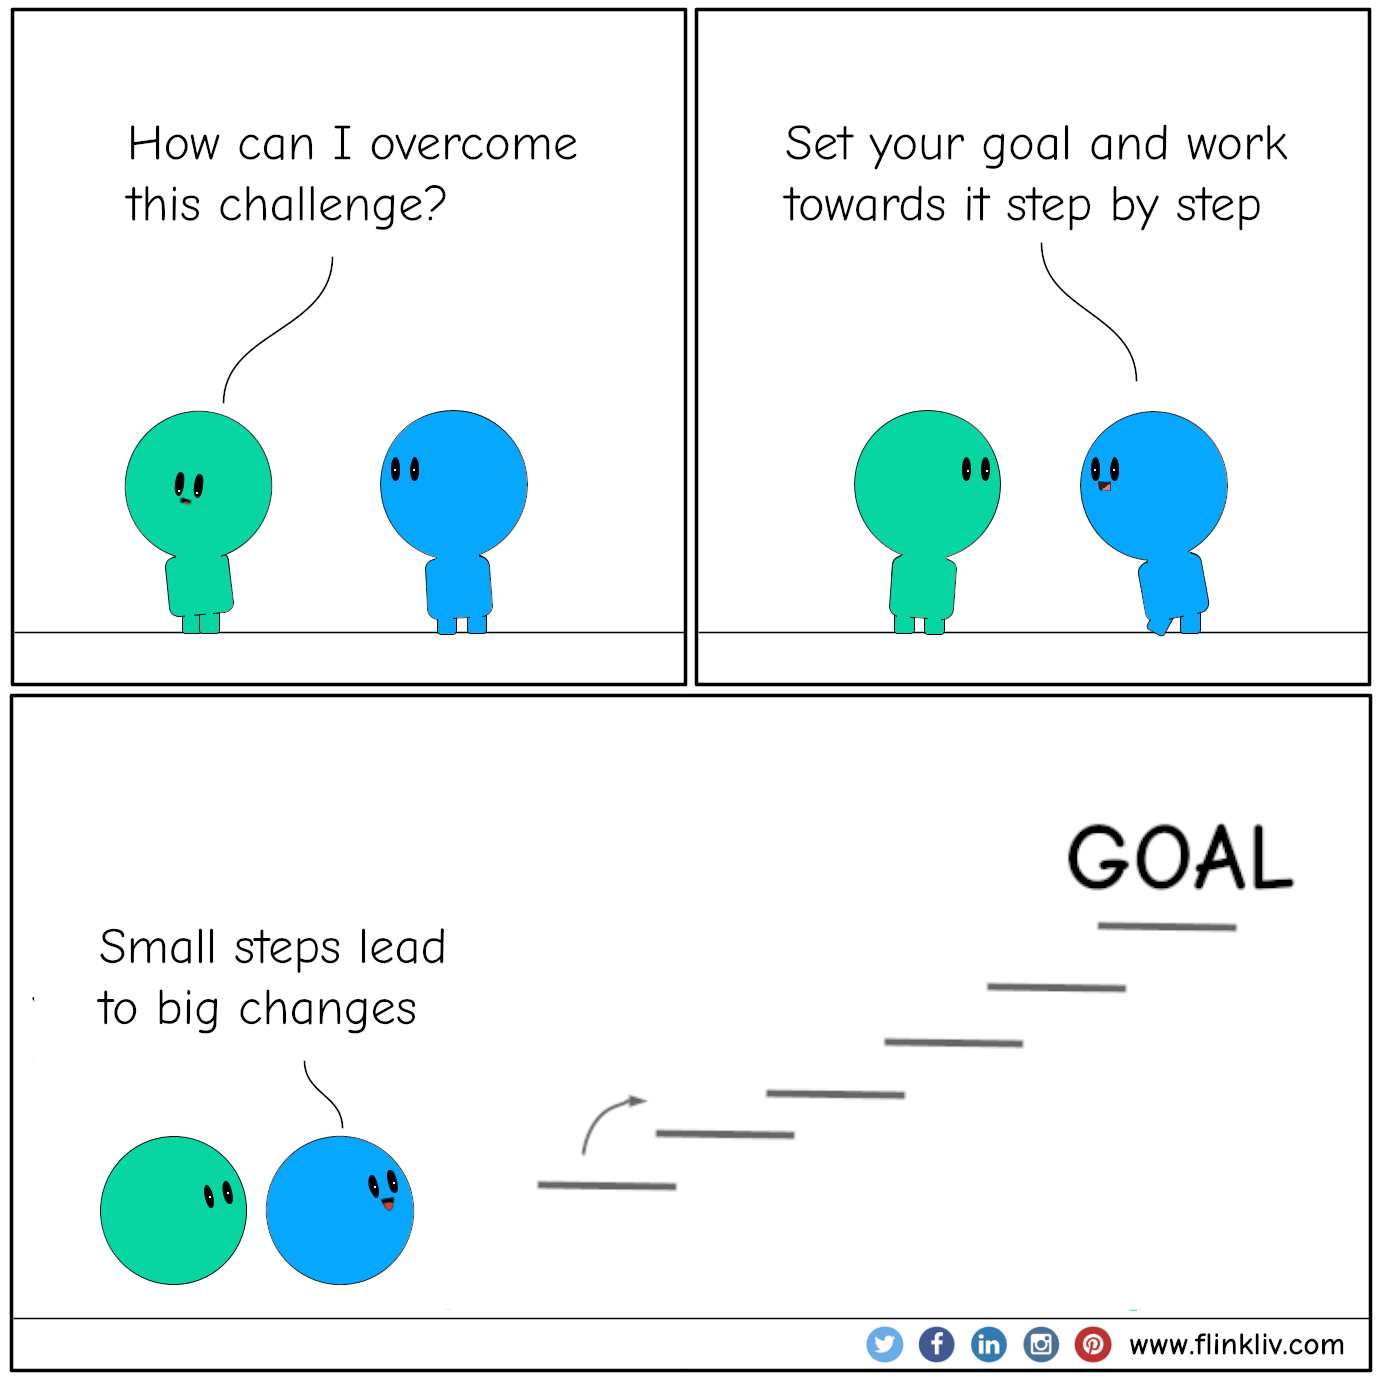 Conversation between A and B about small steps lead to big changes
				A: How can I overcome this challenge?
				B: Small steps lead to big changes.
				B: Set your goal and work towards it daily.
				B: You got this, my friend!

              